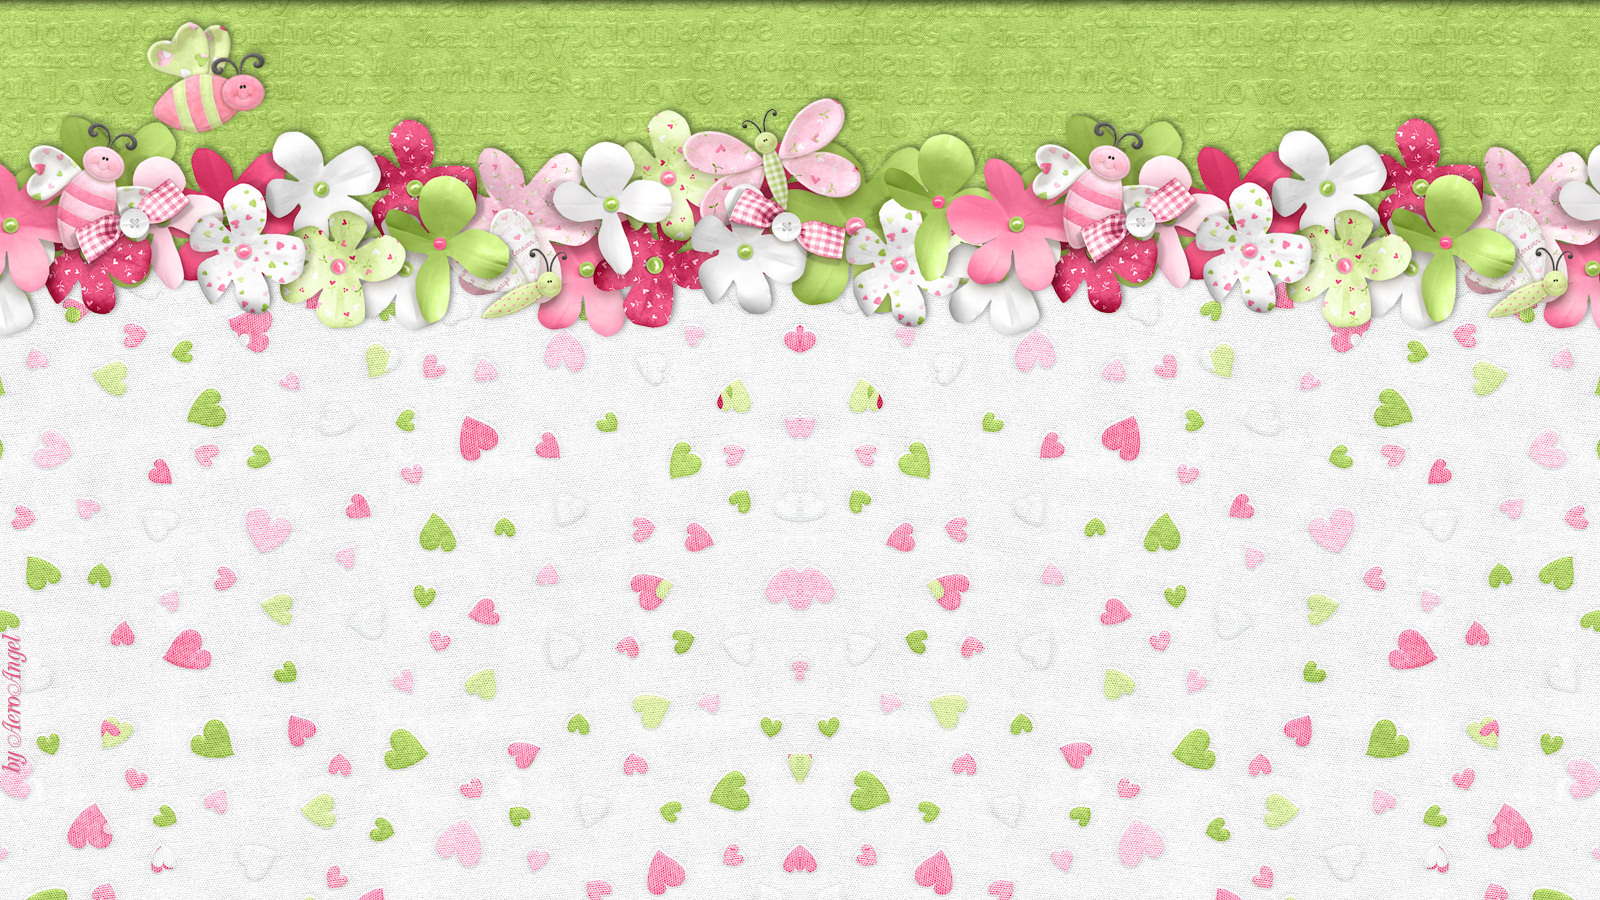 Butterfly Kisses Twitter Backgrounds, Butterfly Kisses Twitter Themes